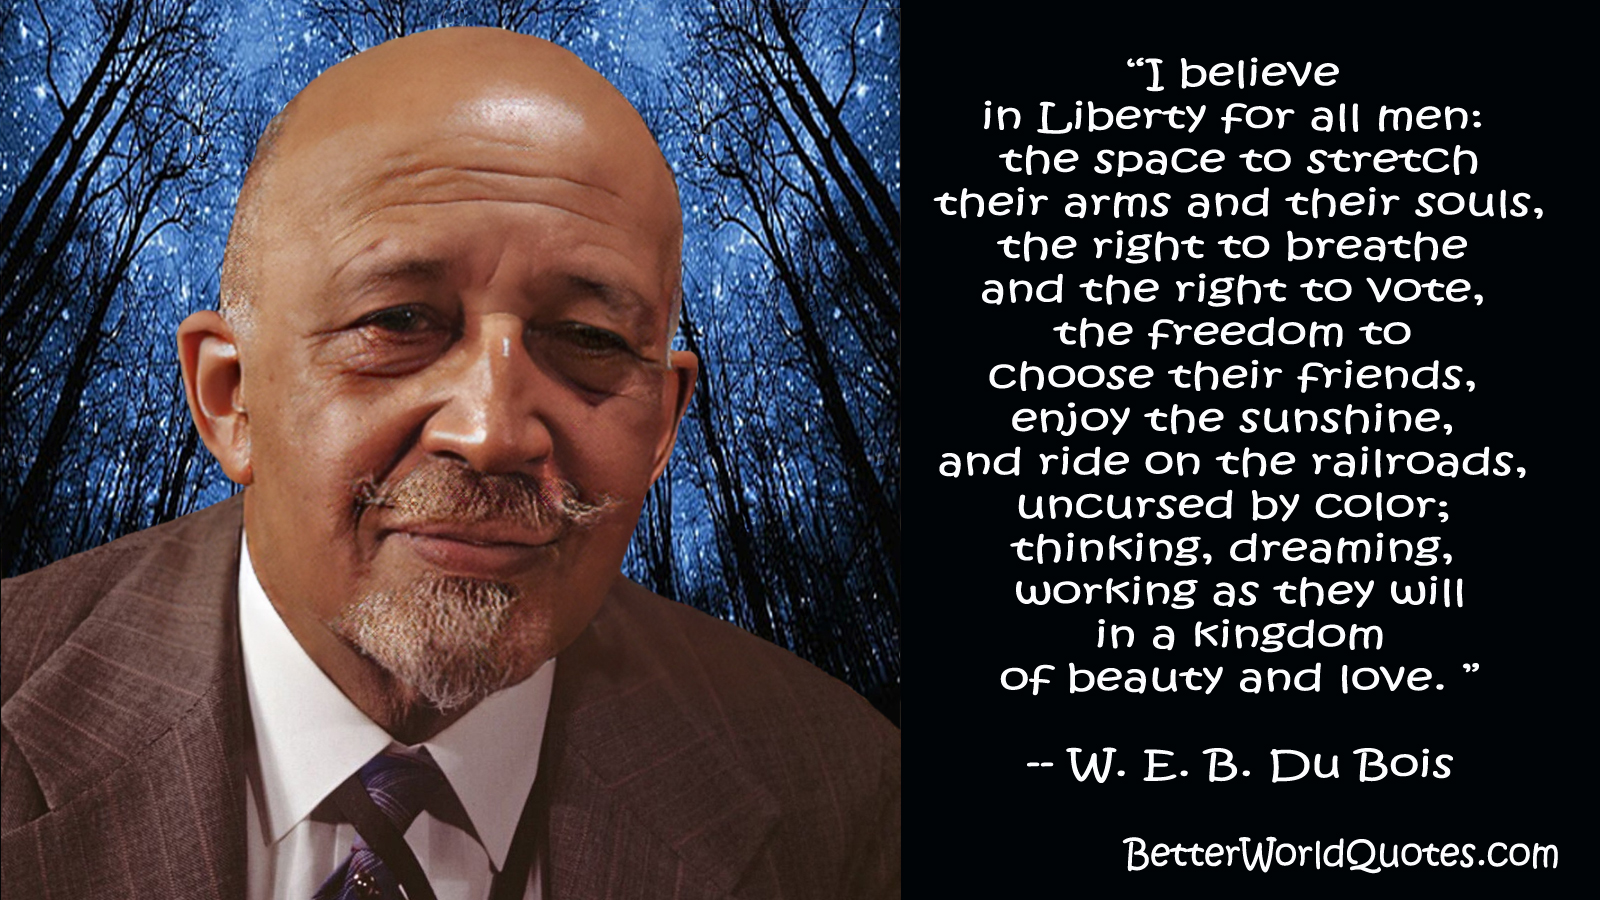 W. E. B. Du Bois: I believe in Liberty for all men: the space to stretch their arms and their souls, the right to breathe and the right to vote, the freedom to choose their friends, enjoy the sunshine, and ride on the railroads, uncursed by color; thinking, dreaming, working as they will in a kingdom of beauty and love.